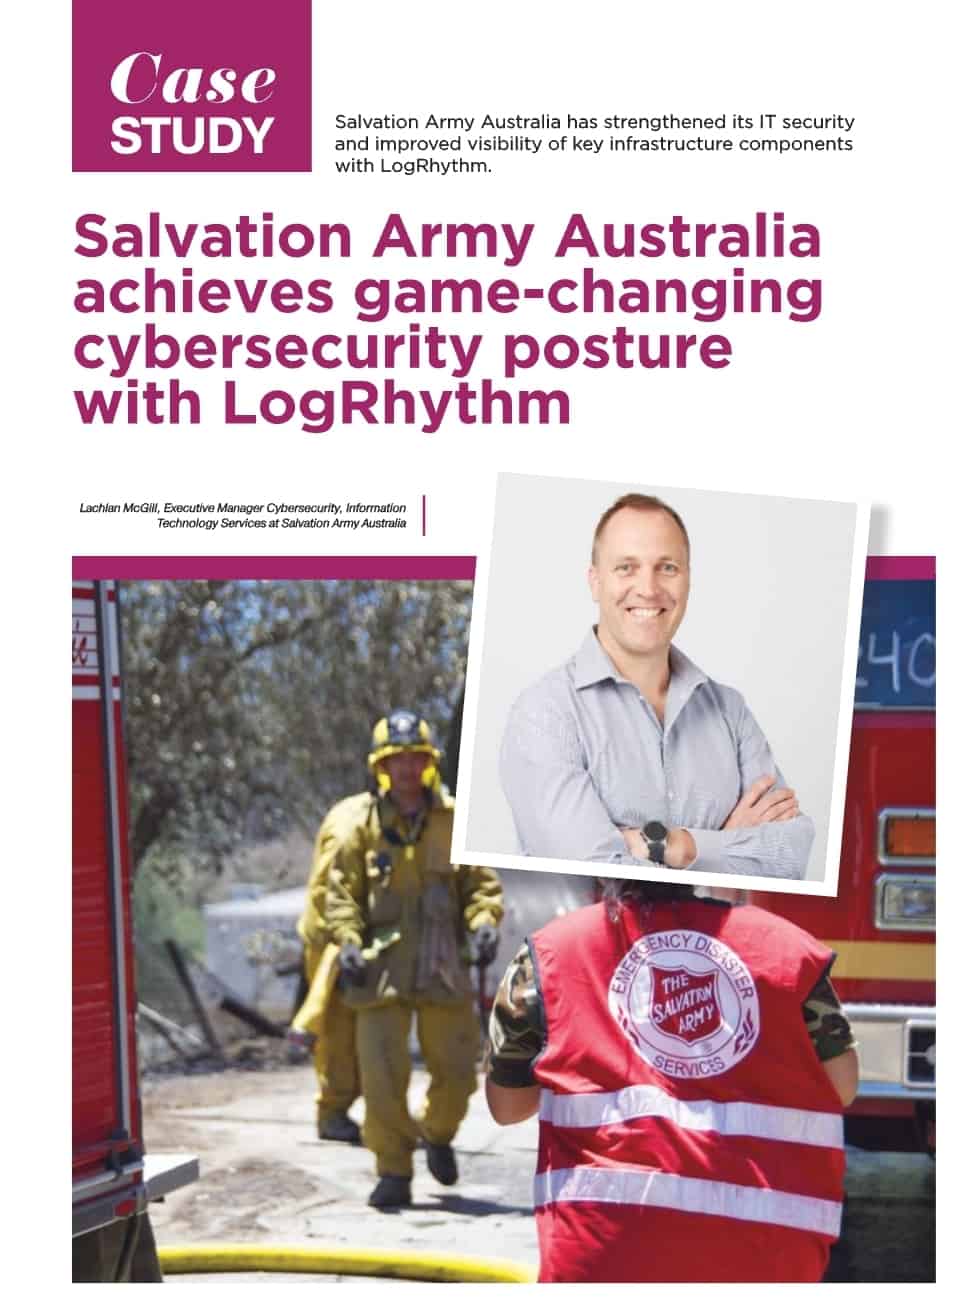 Salvation Army Australia achieves game-changing cybersecurity posture with LogRhythm